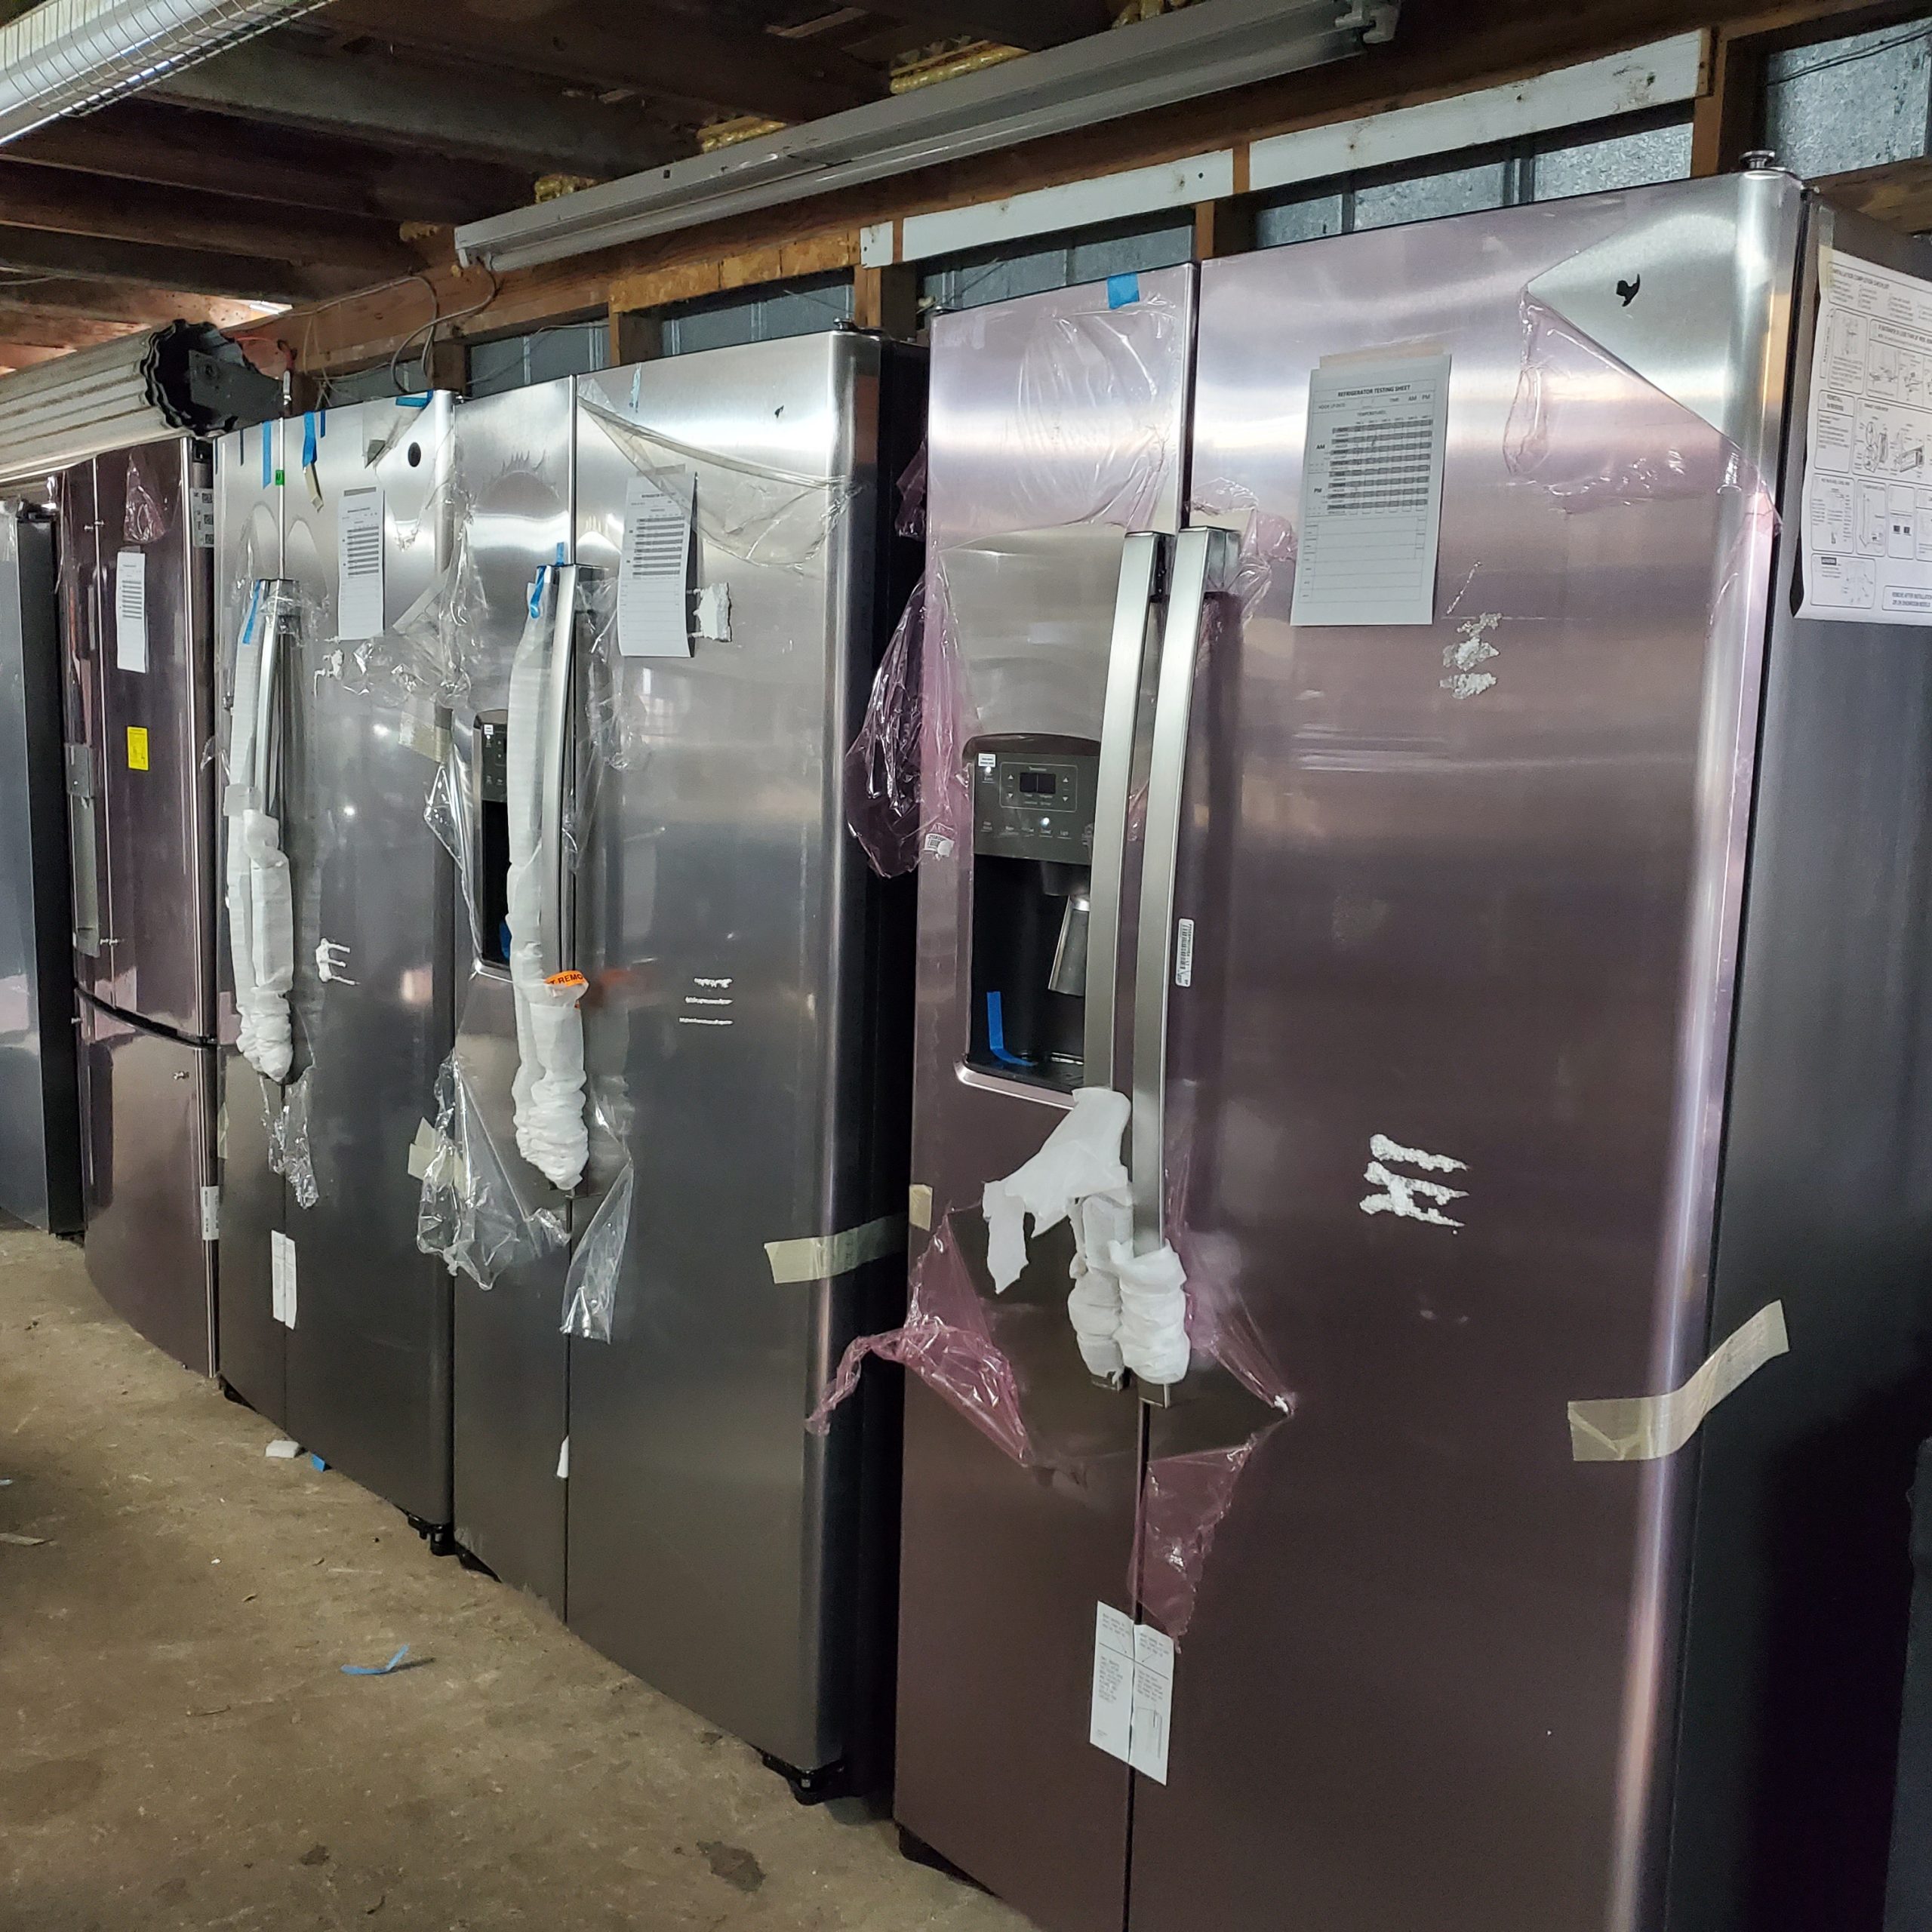 example of GE stainless steel scratch and dent refrigerators available by the truckload.